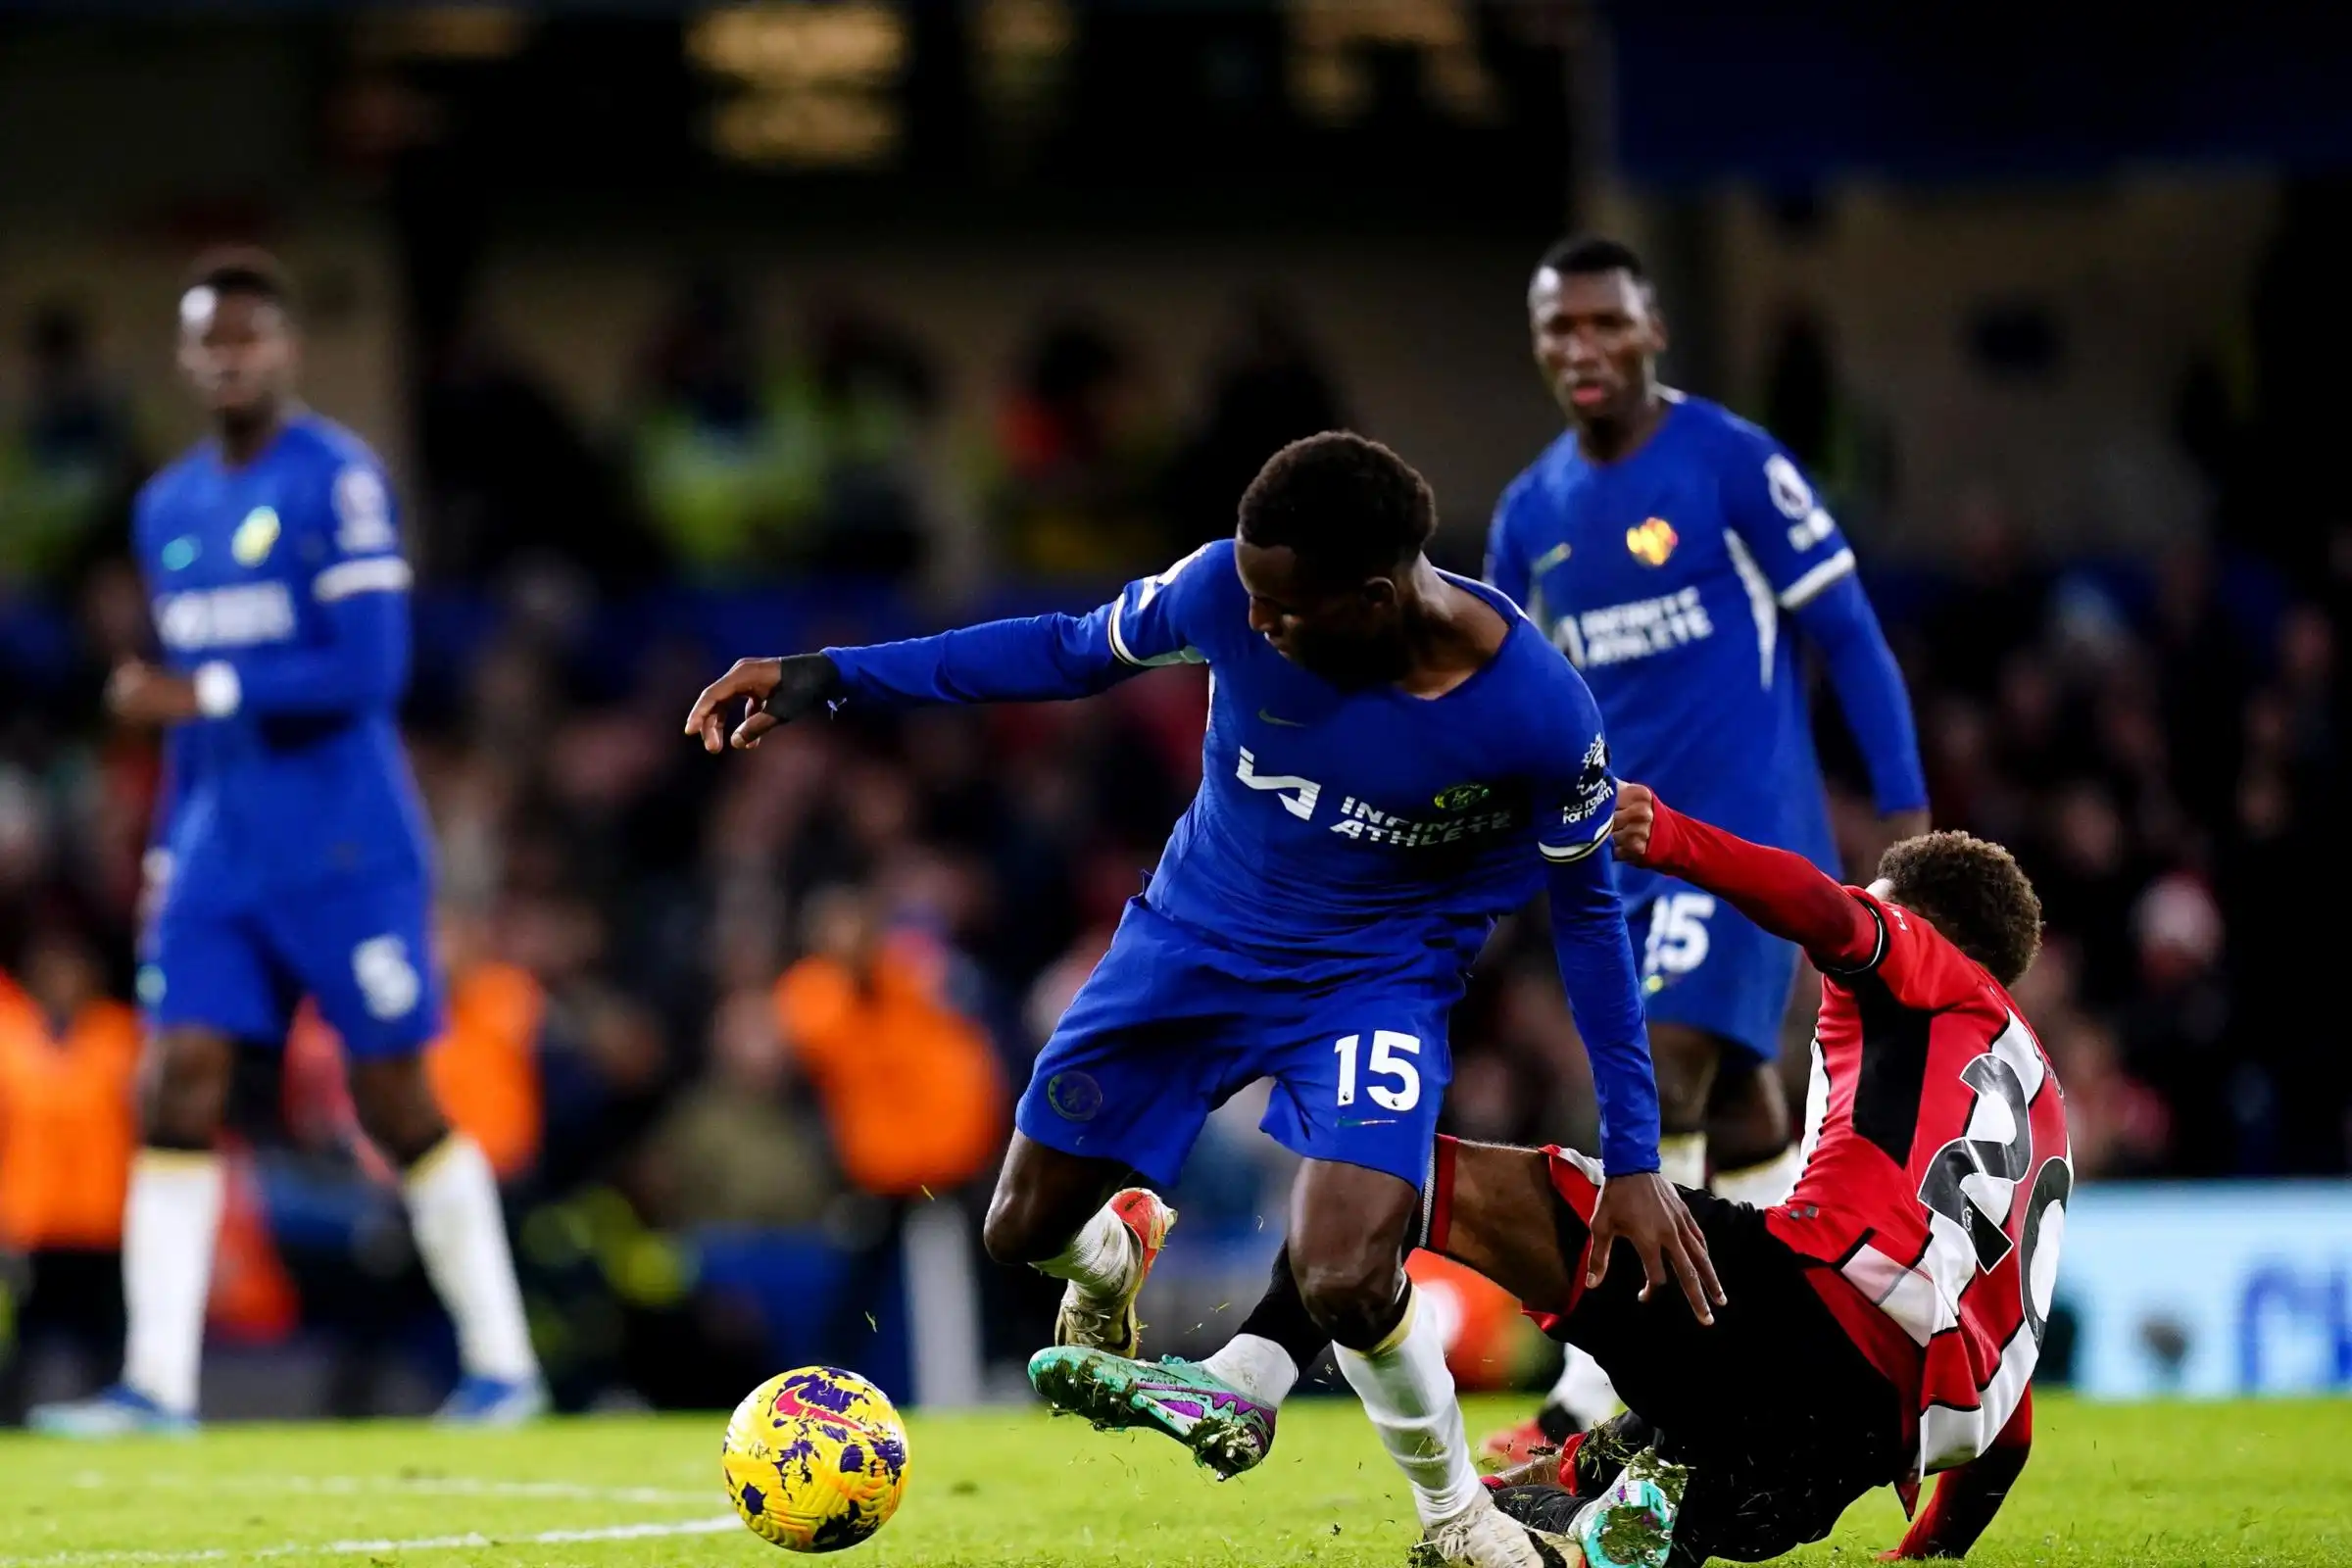 Chelsea ease past Sheffield United after slow start